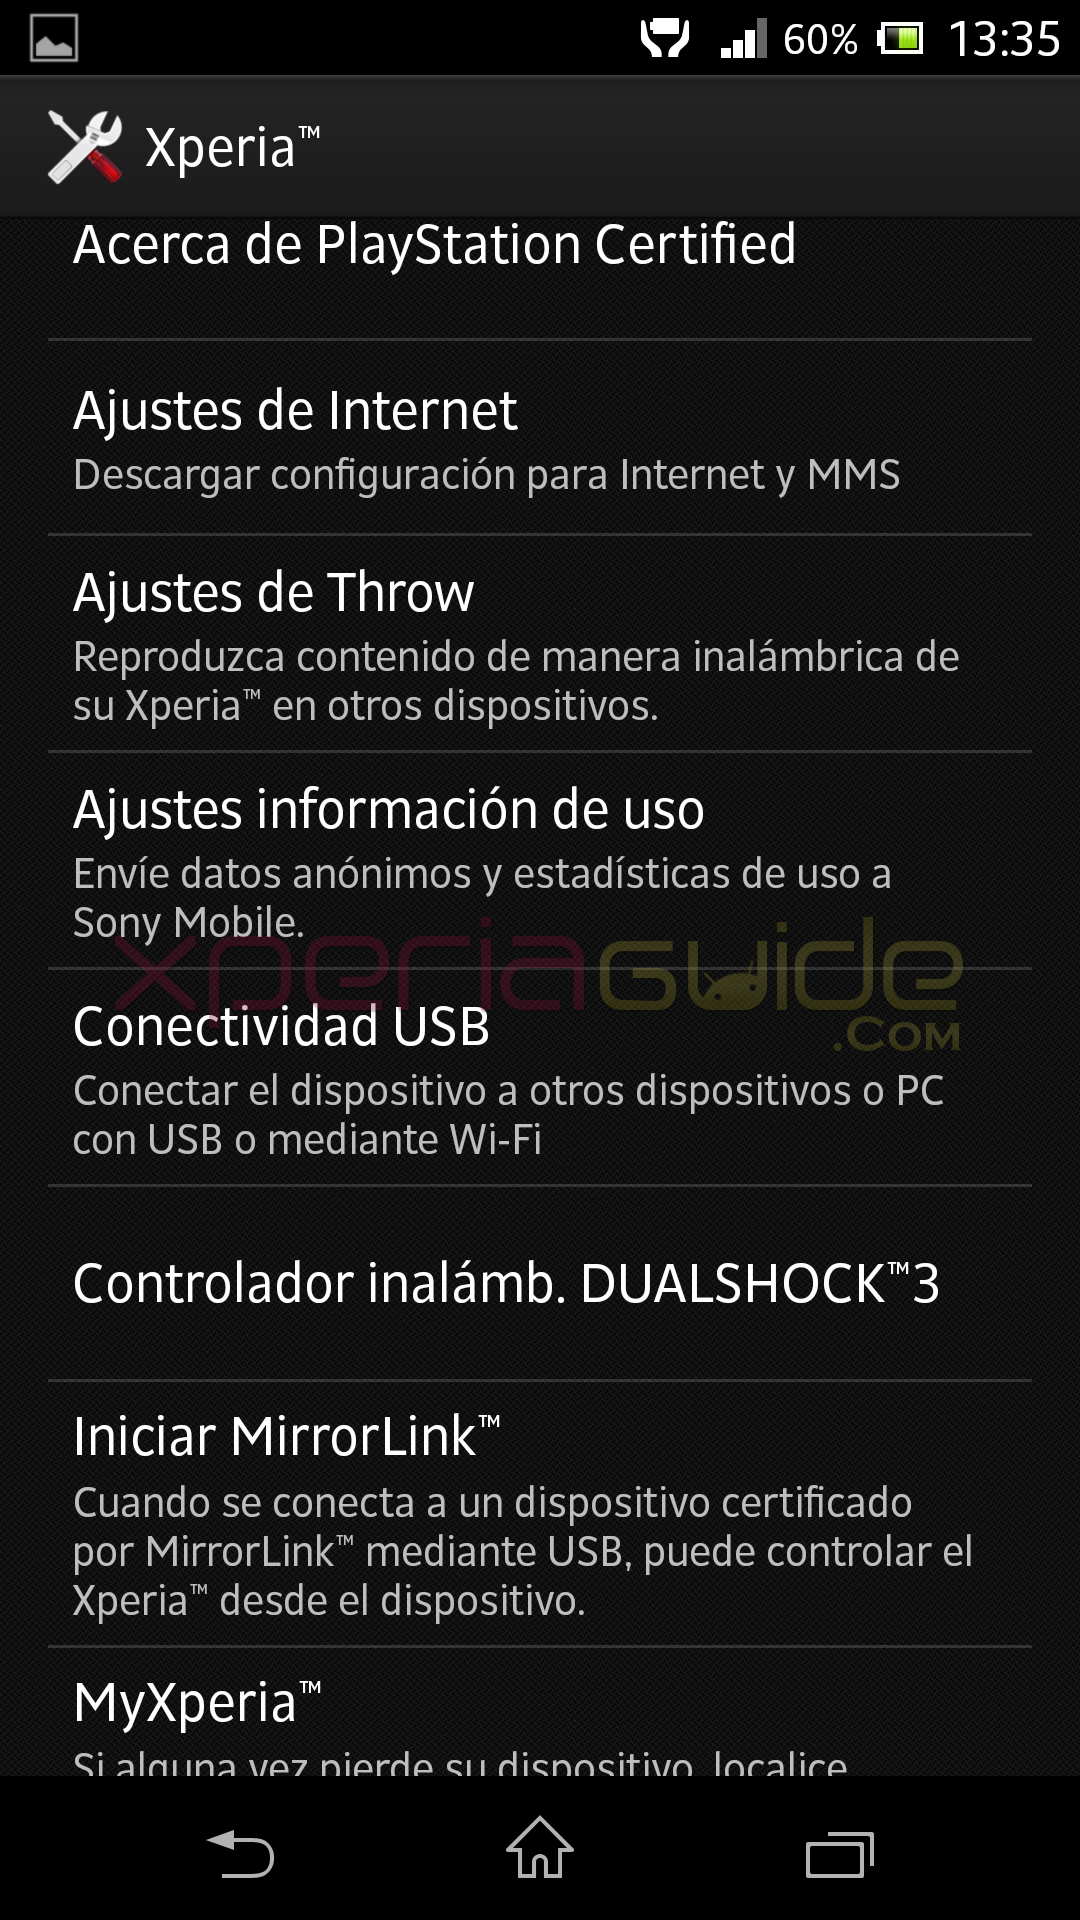 Xperia Options in Xperia Z C6603 Android 4.2.2 Jelly Bean 10.3.A.0.423